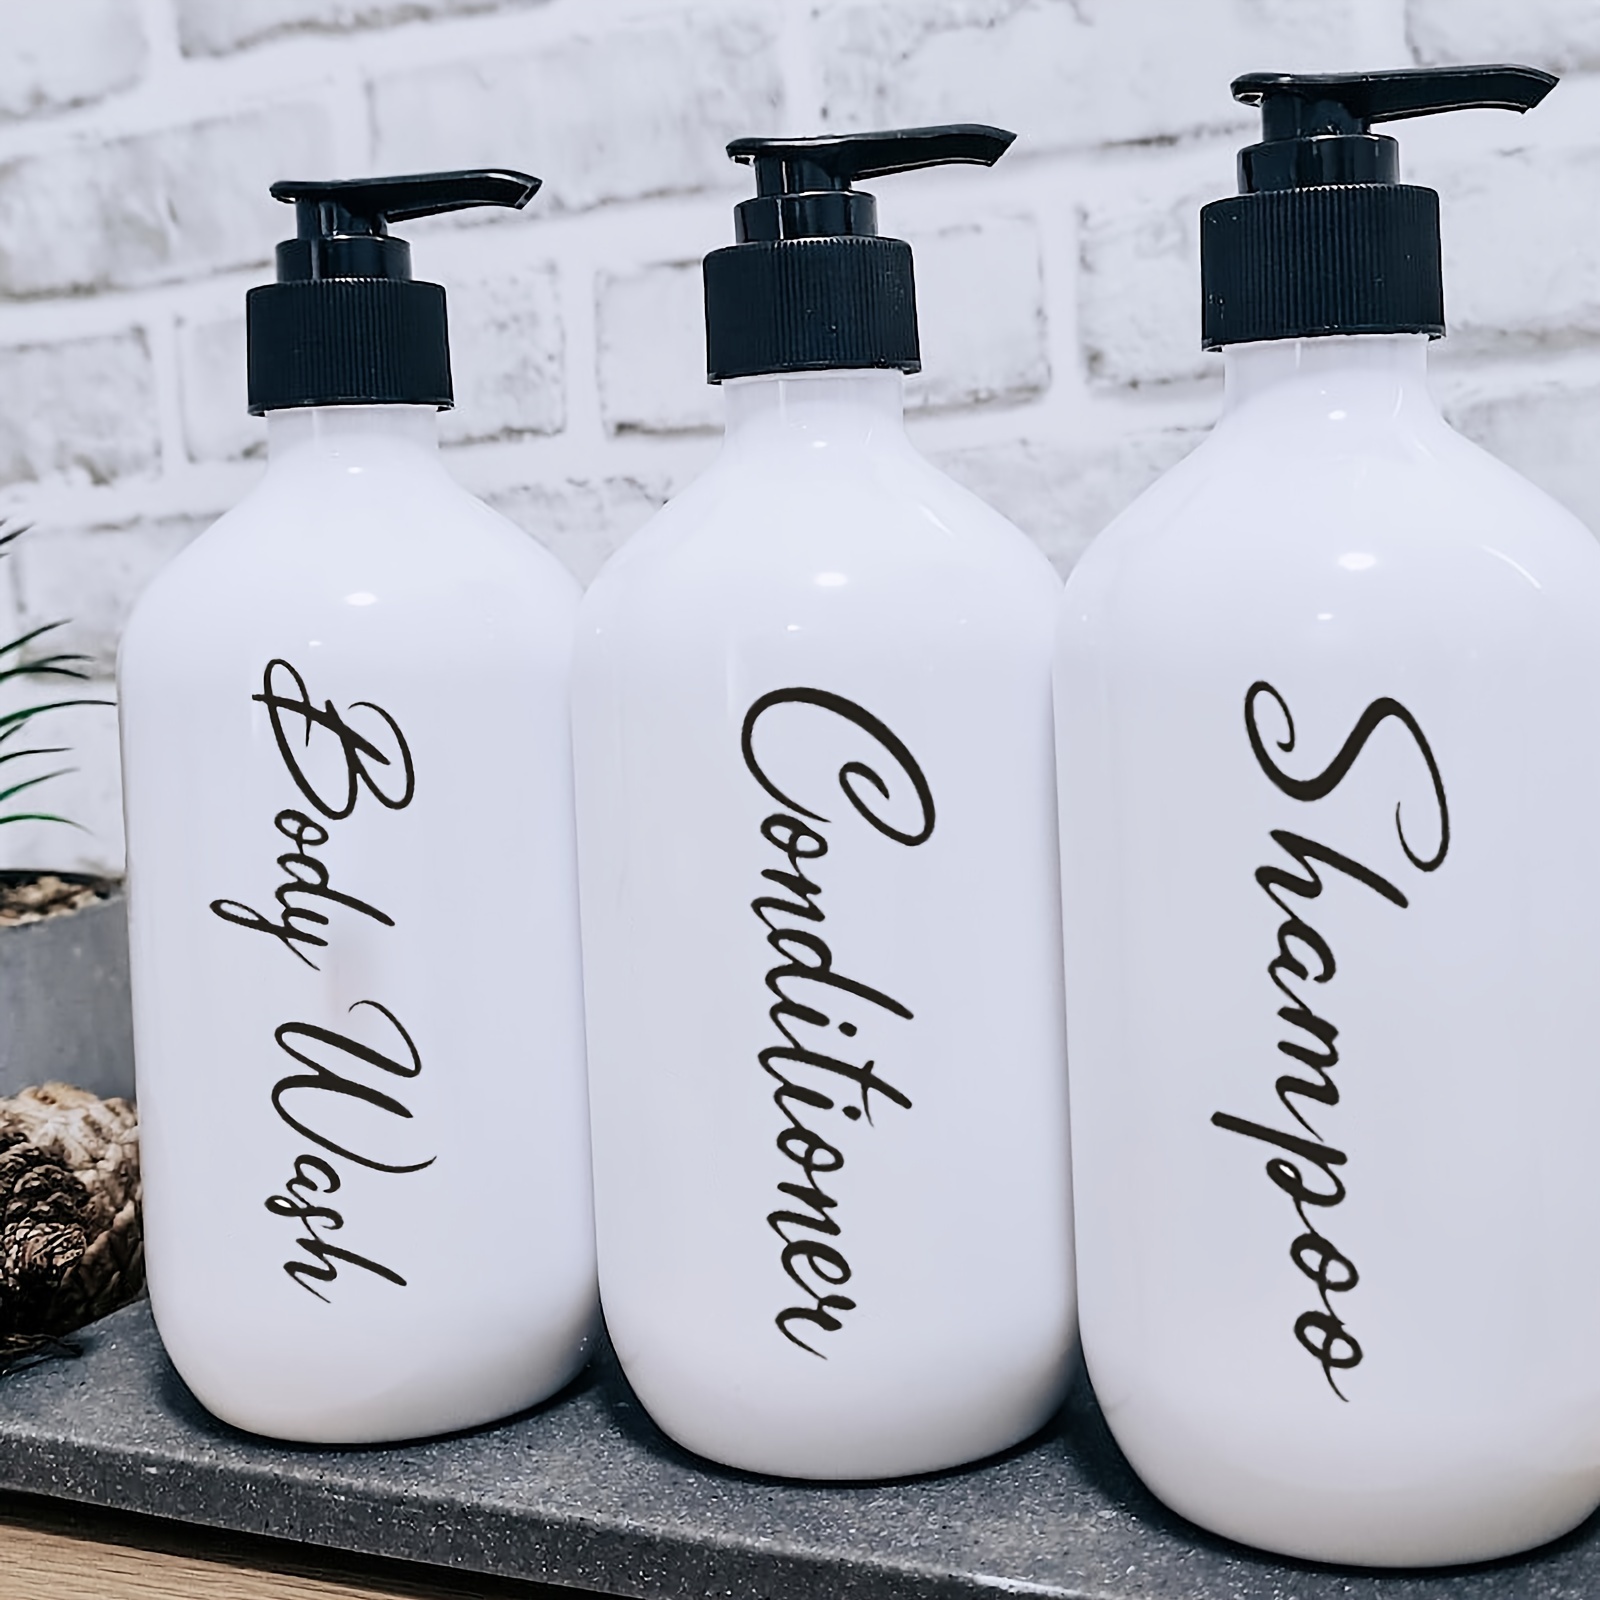 Dispensers for Soap, Shampoo, and Conditioner - bath/shower organizers